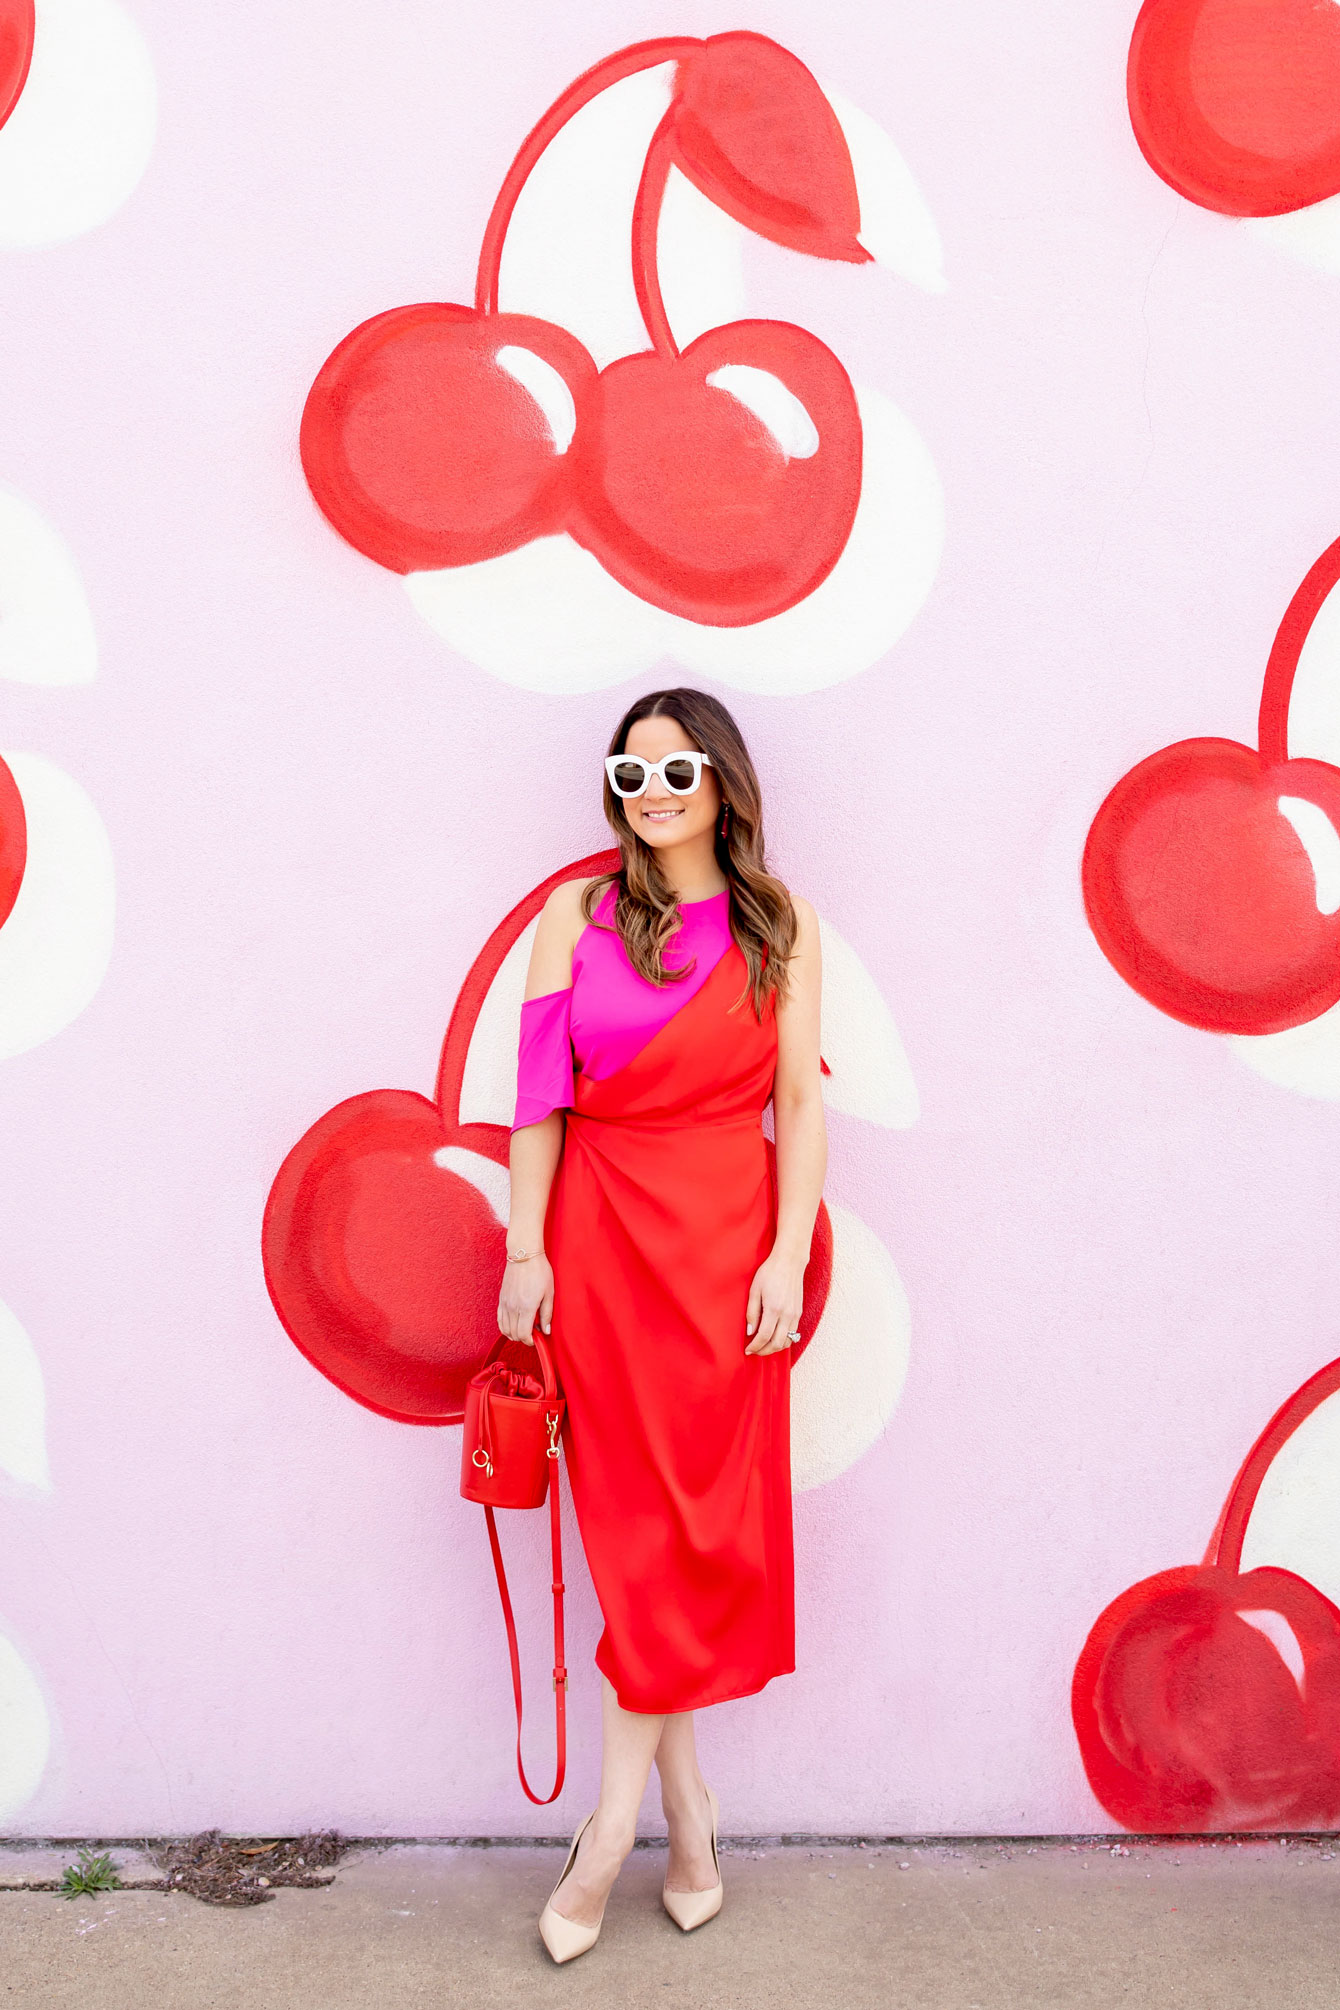 The Most Instagrammable Dallas Cherry Mural